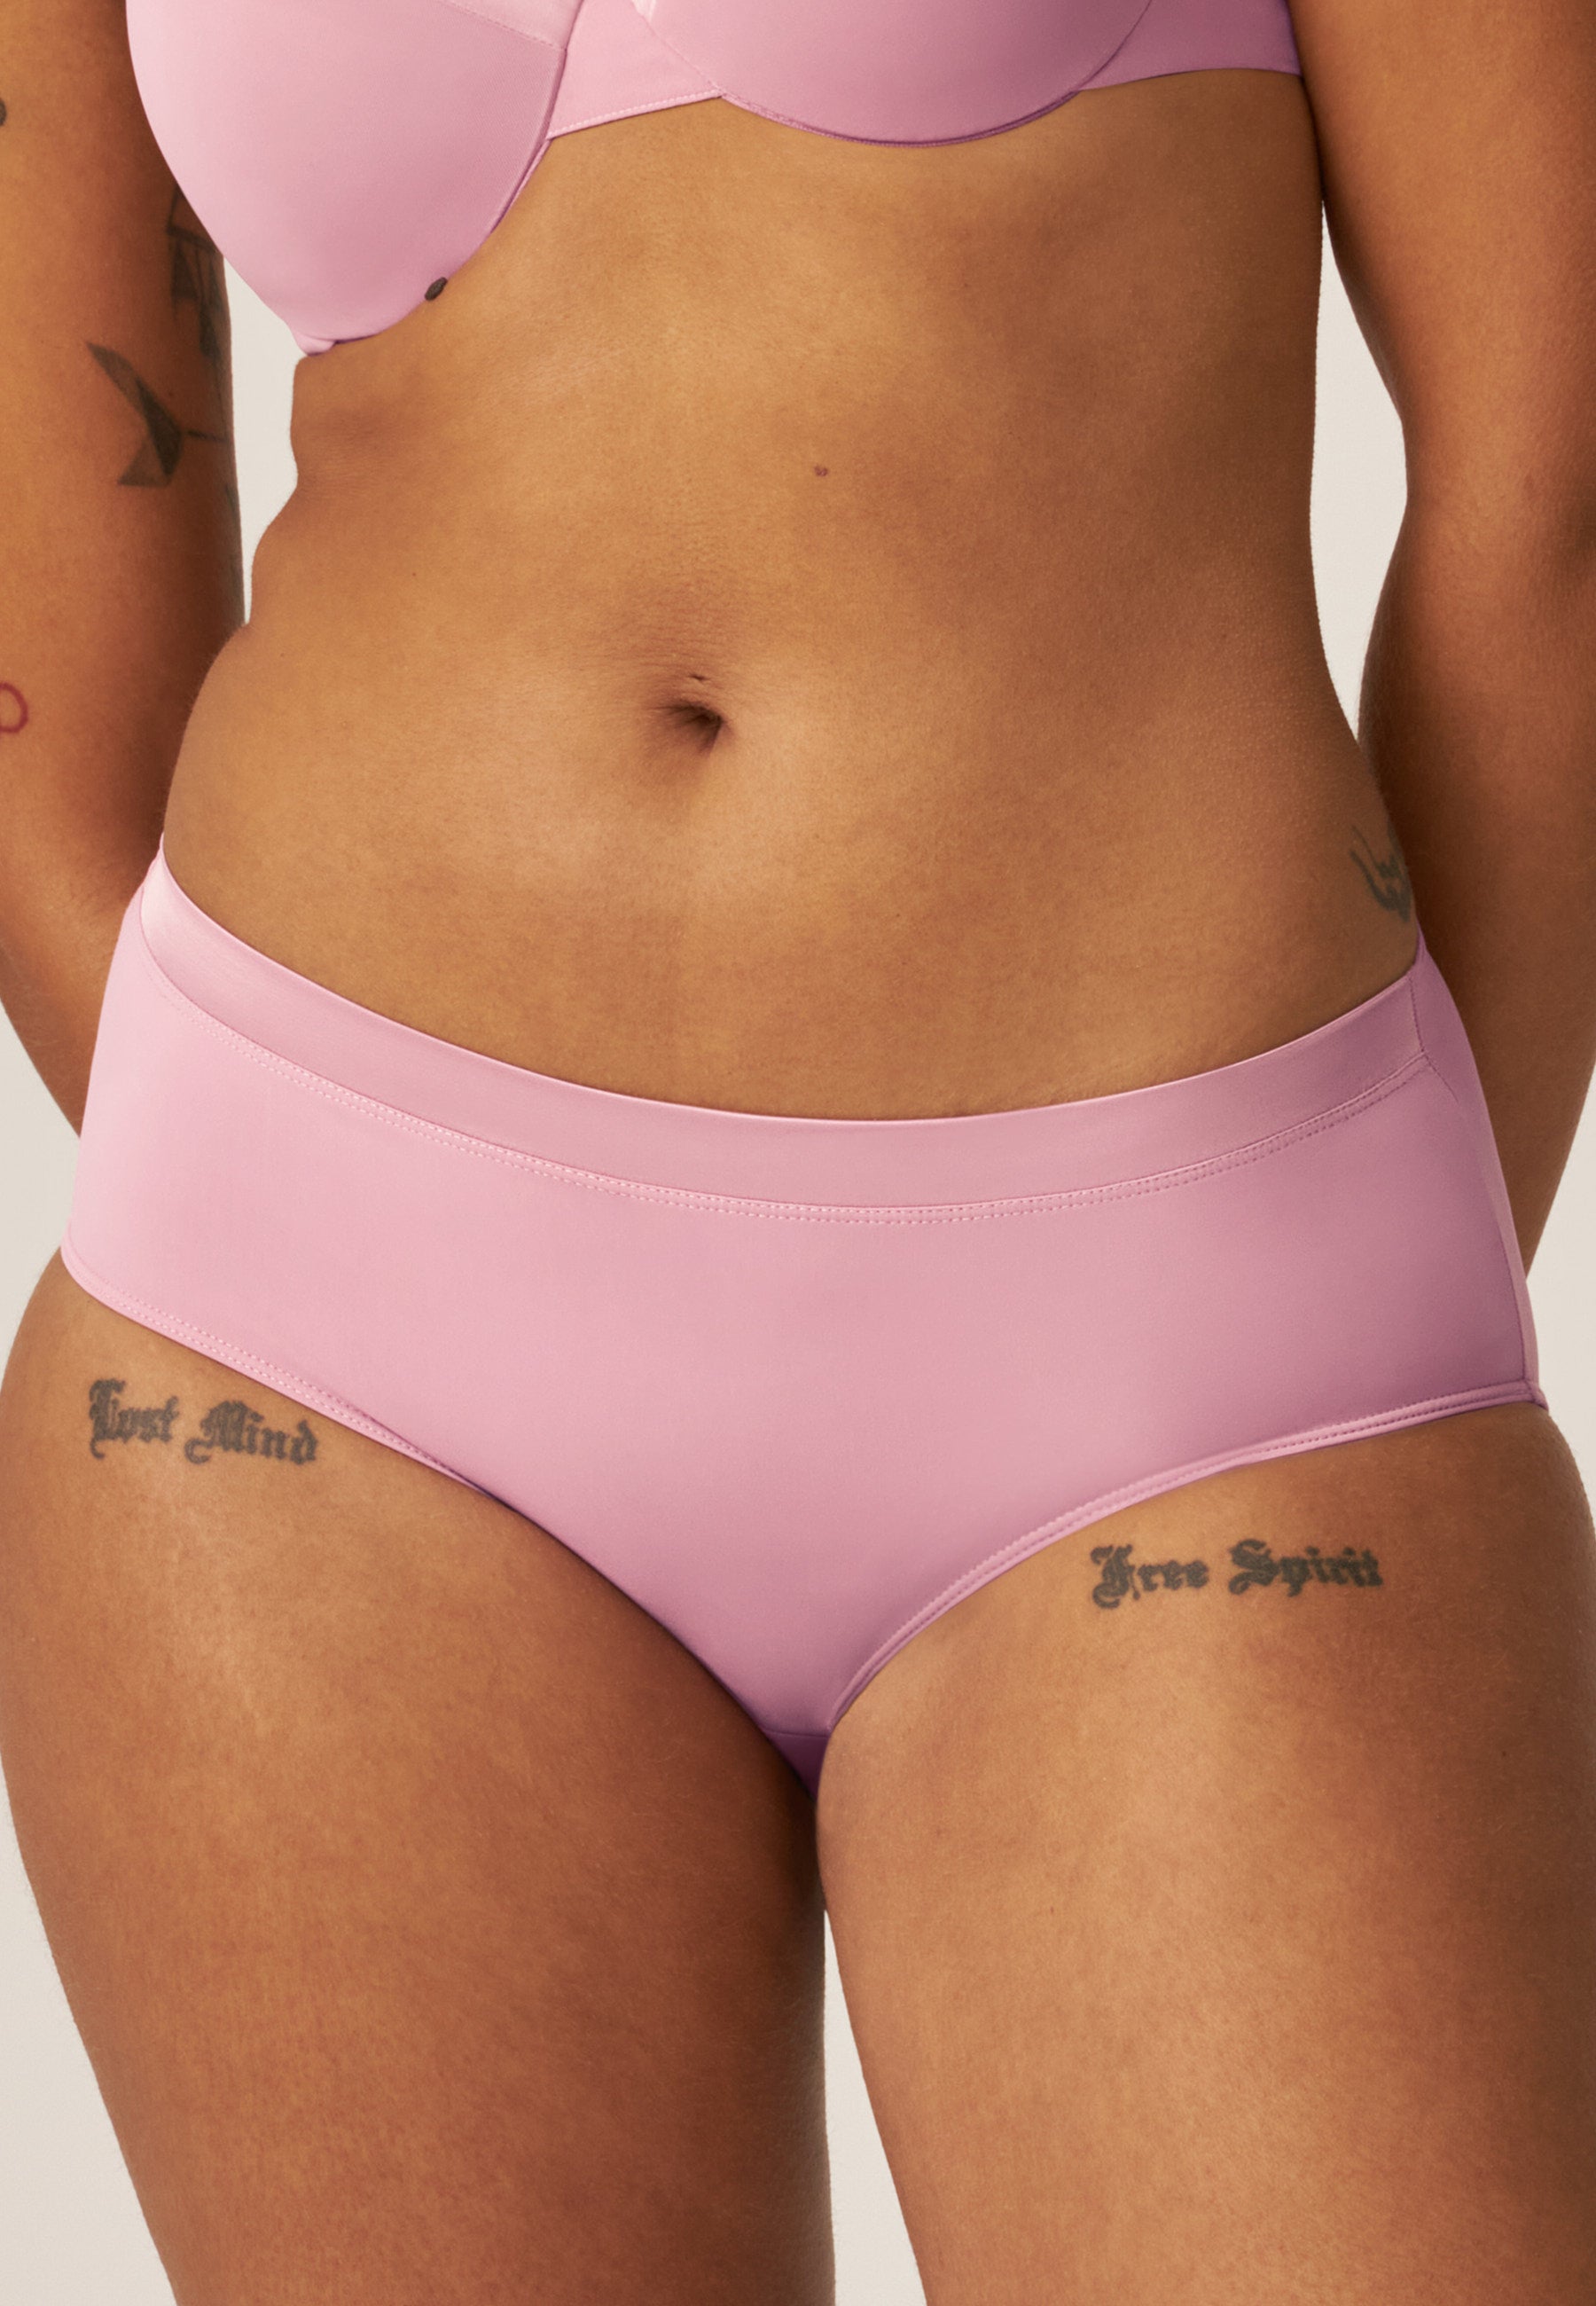 Briefs in different styles - Briefs for every type of woman - buy your new  briefs online